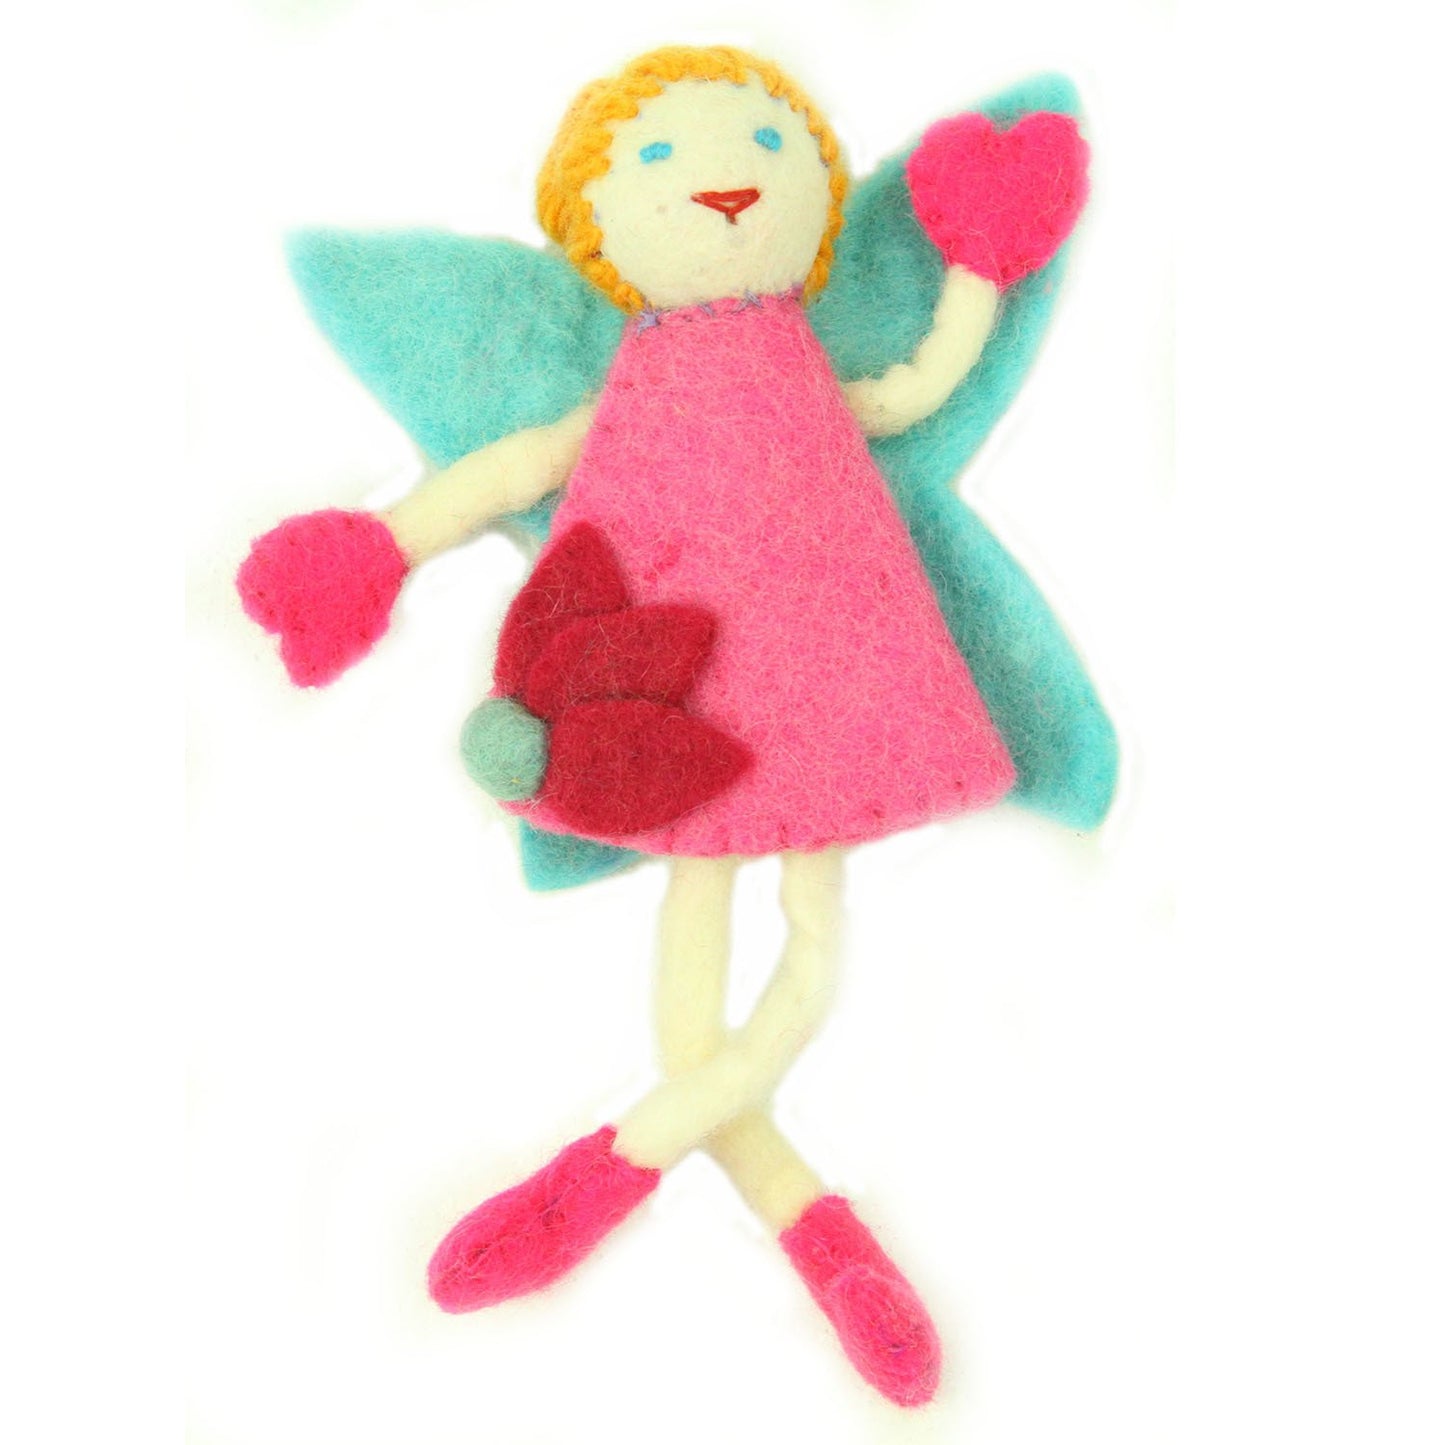 This Global Groove Life, handmade, ethical, fair trade, eco-friendly, sustainable, blonde-haired, pink and turquoise, tooth fairy,was created by artisans in Kathmandu Nepal and is adorned with an adorable flower motif.